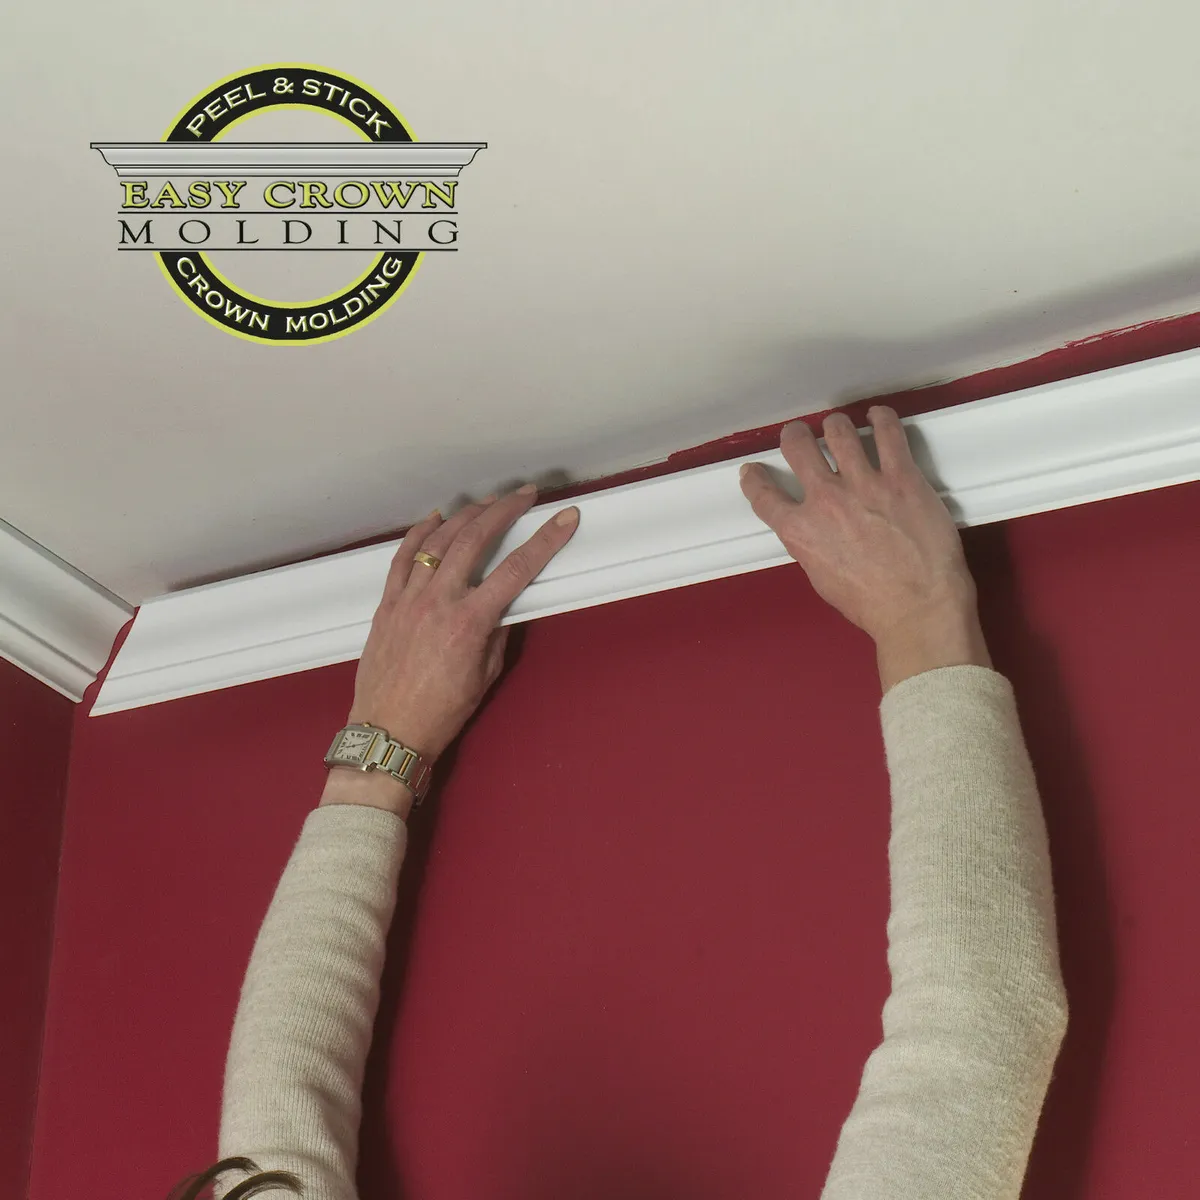 stick on crown molding